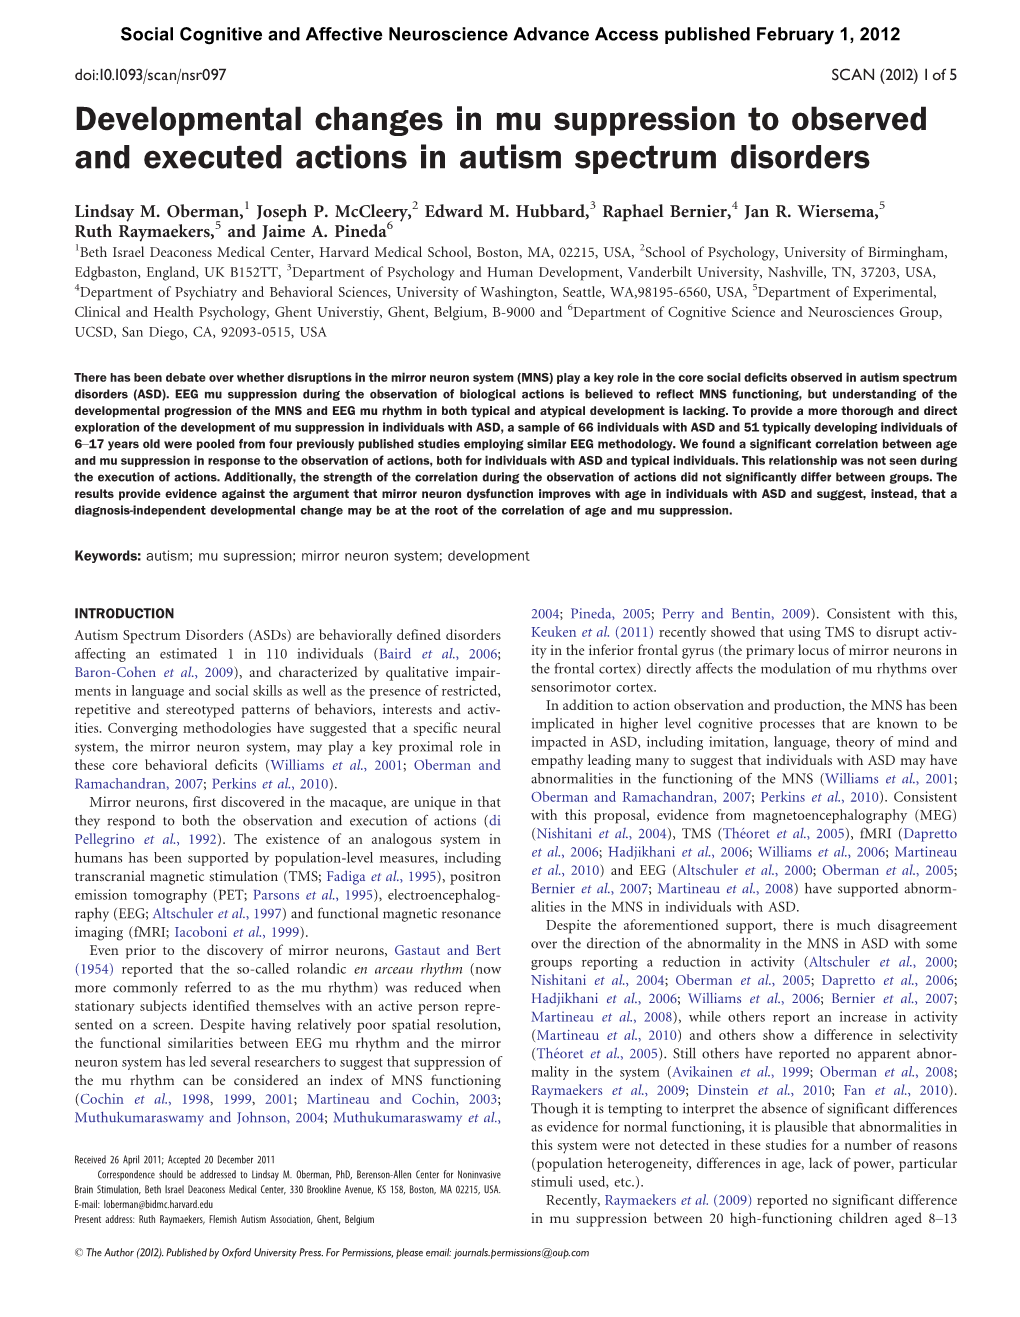 Developmental Changes in Mu Suppression to Observed and Executed Actions in Autism Spectrum Disorders